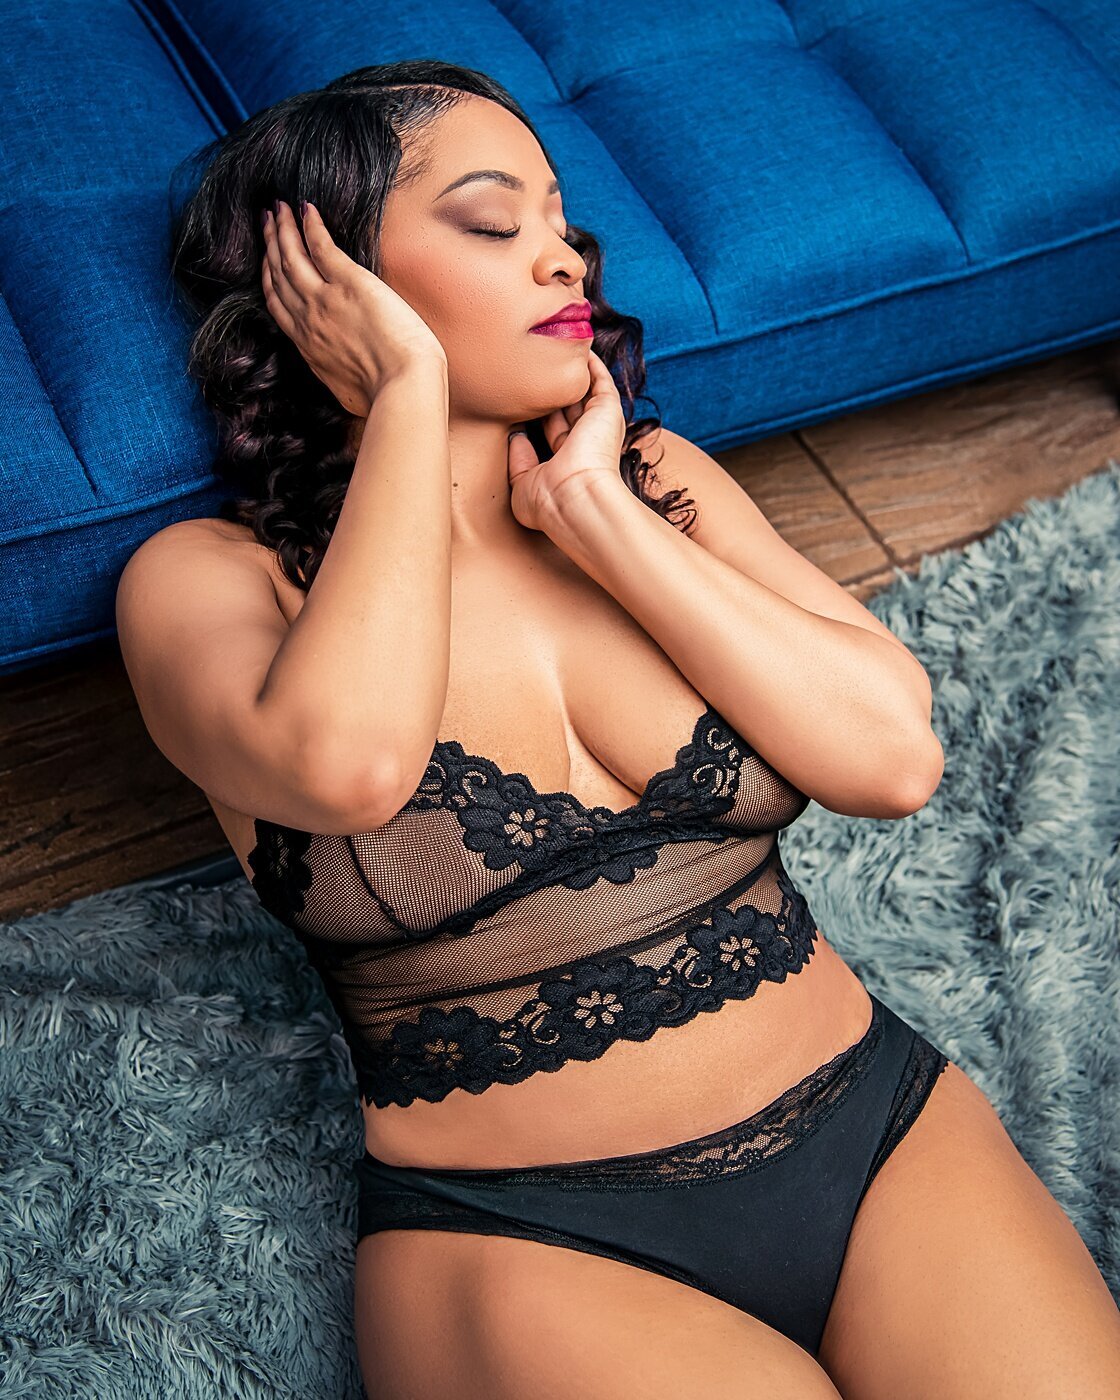 A woman in black lace lingerie poses during her boudoir photoshoot.